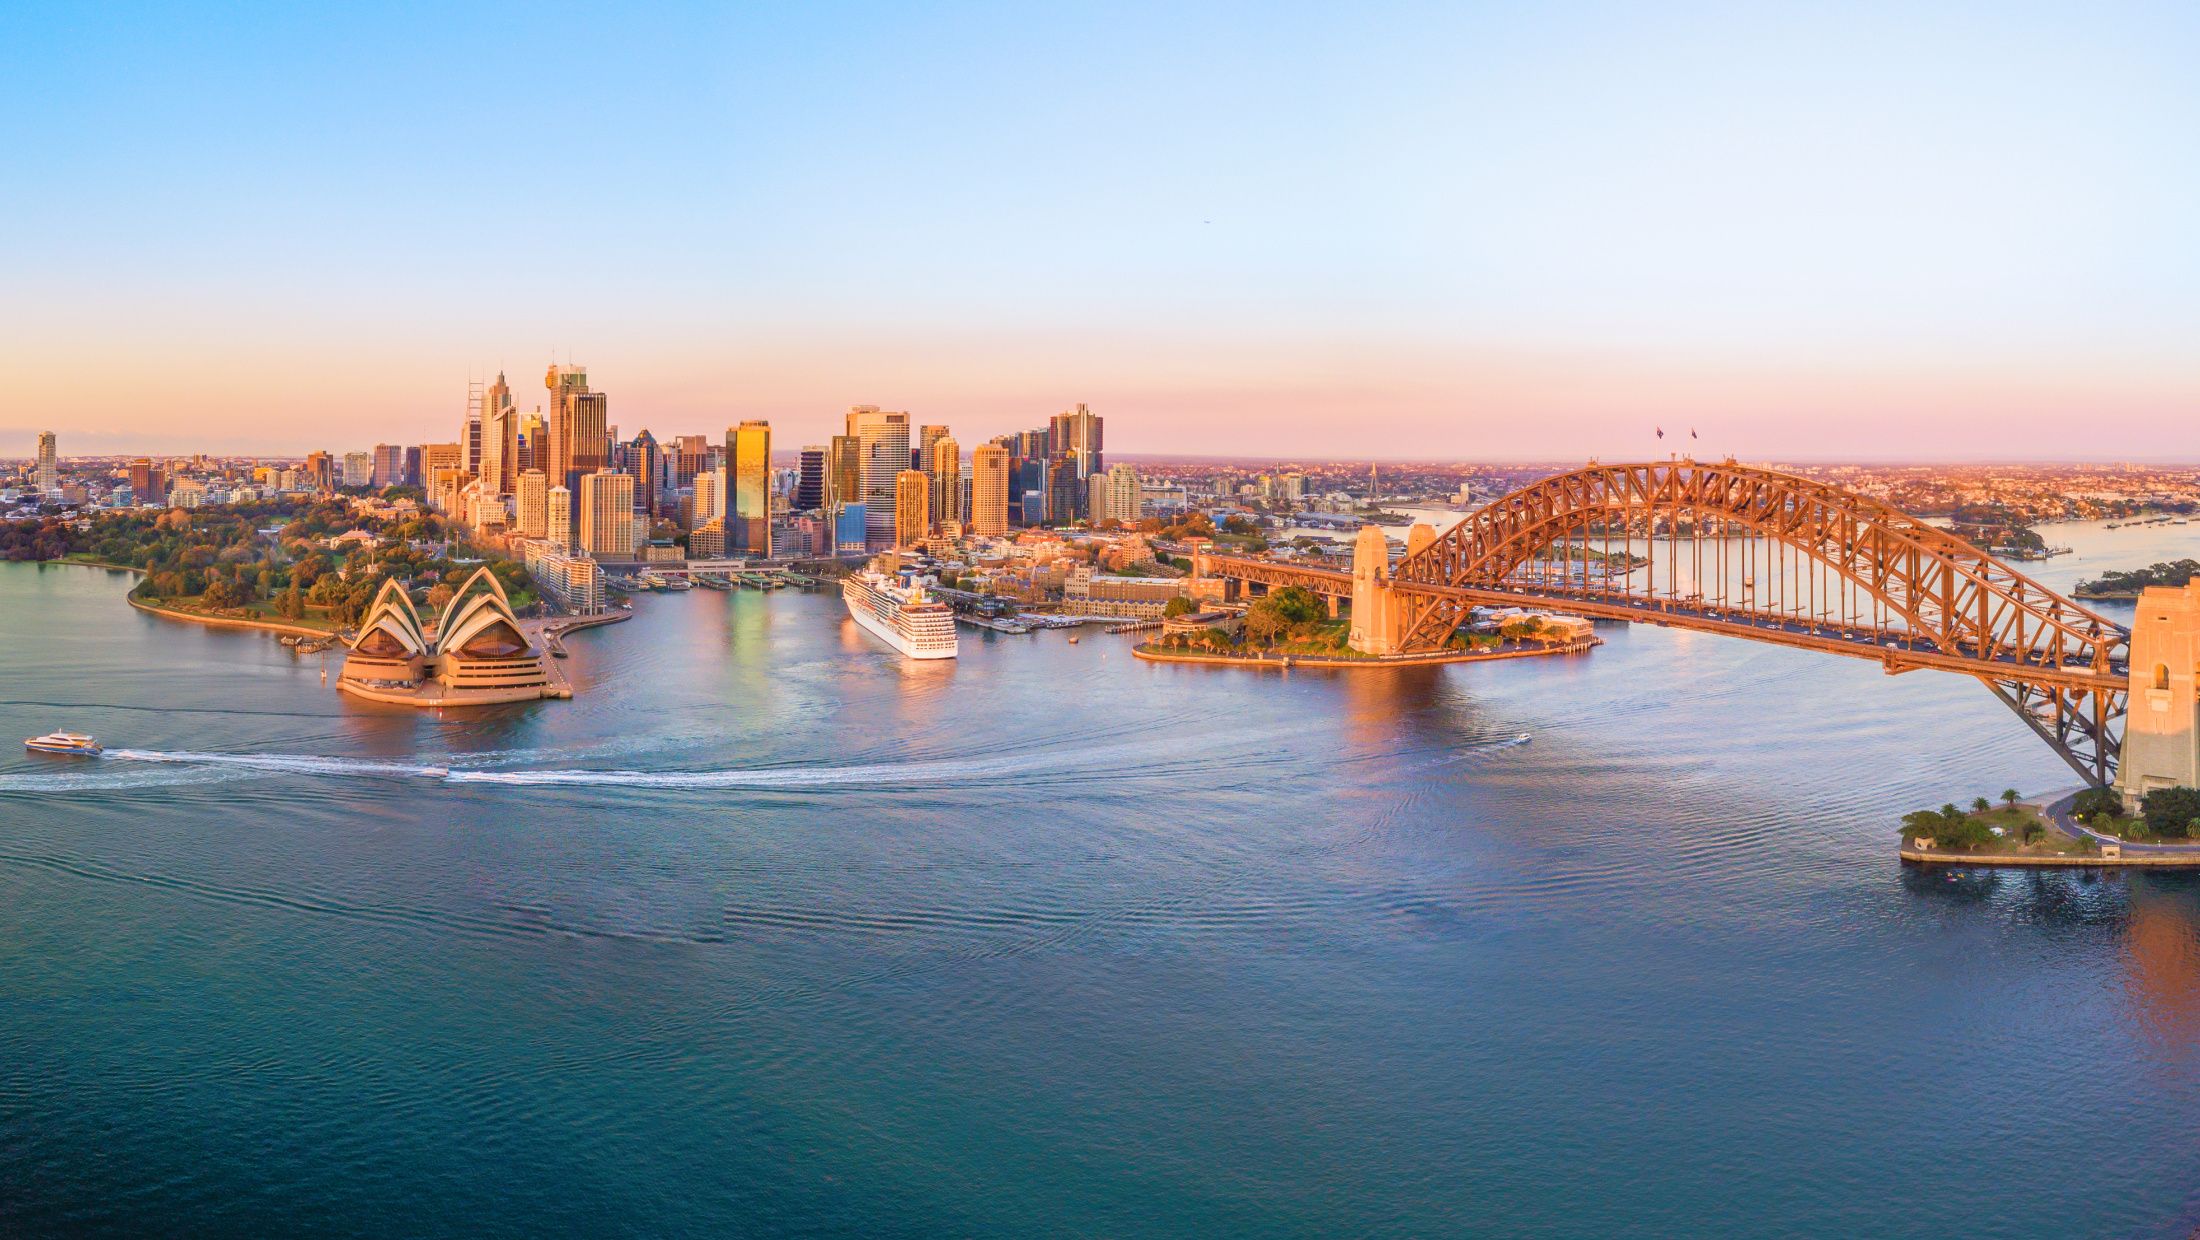 aerial view of the city, bridge and famous opera house in sydney